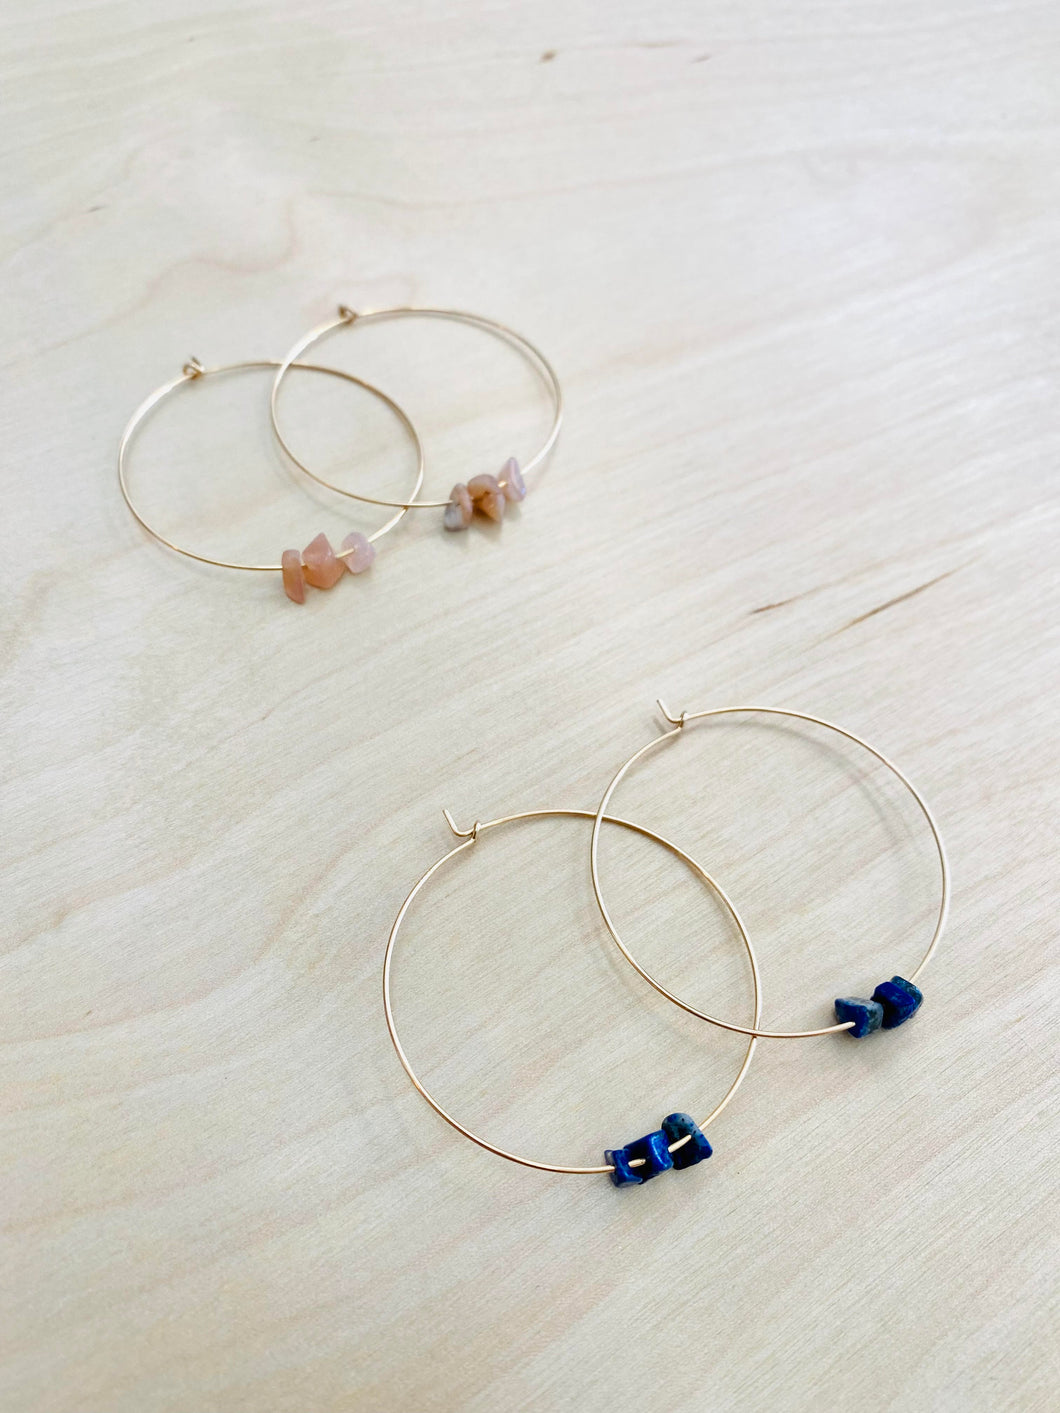 Tiny Crystal Hoop Earrings - 45mm (Gold Filled)